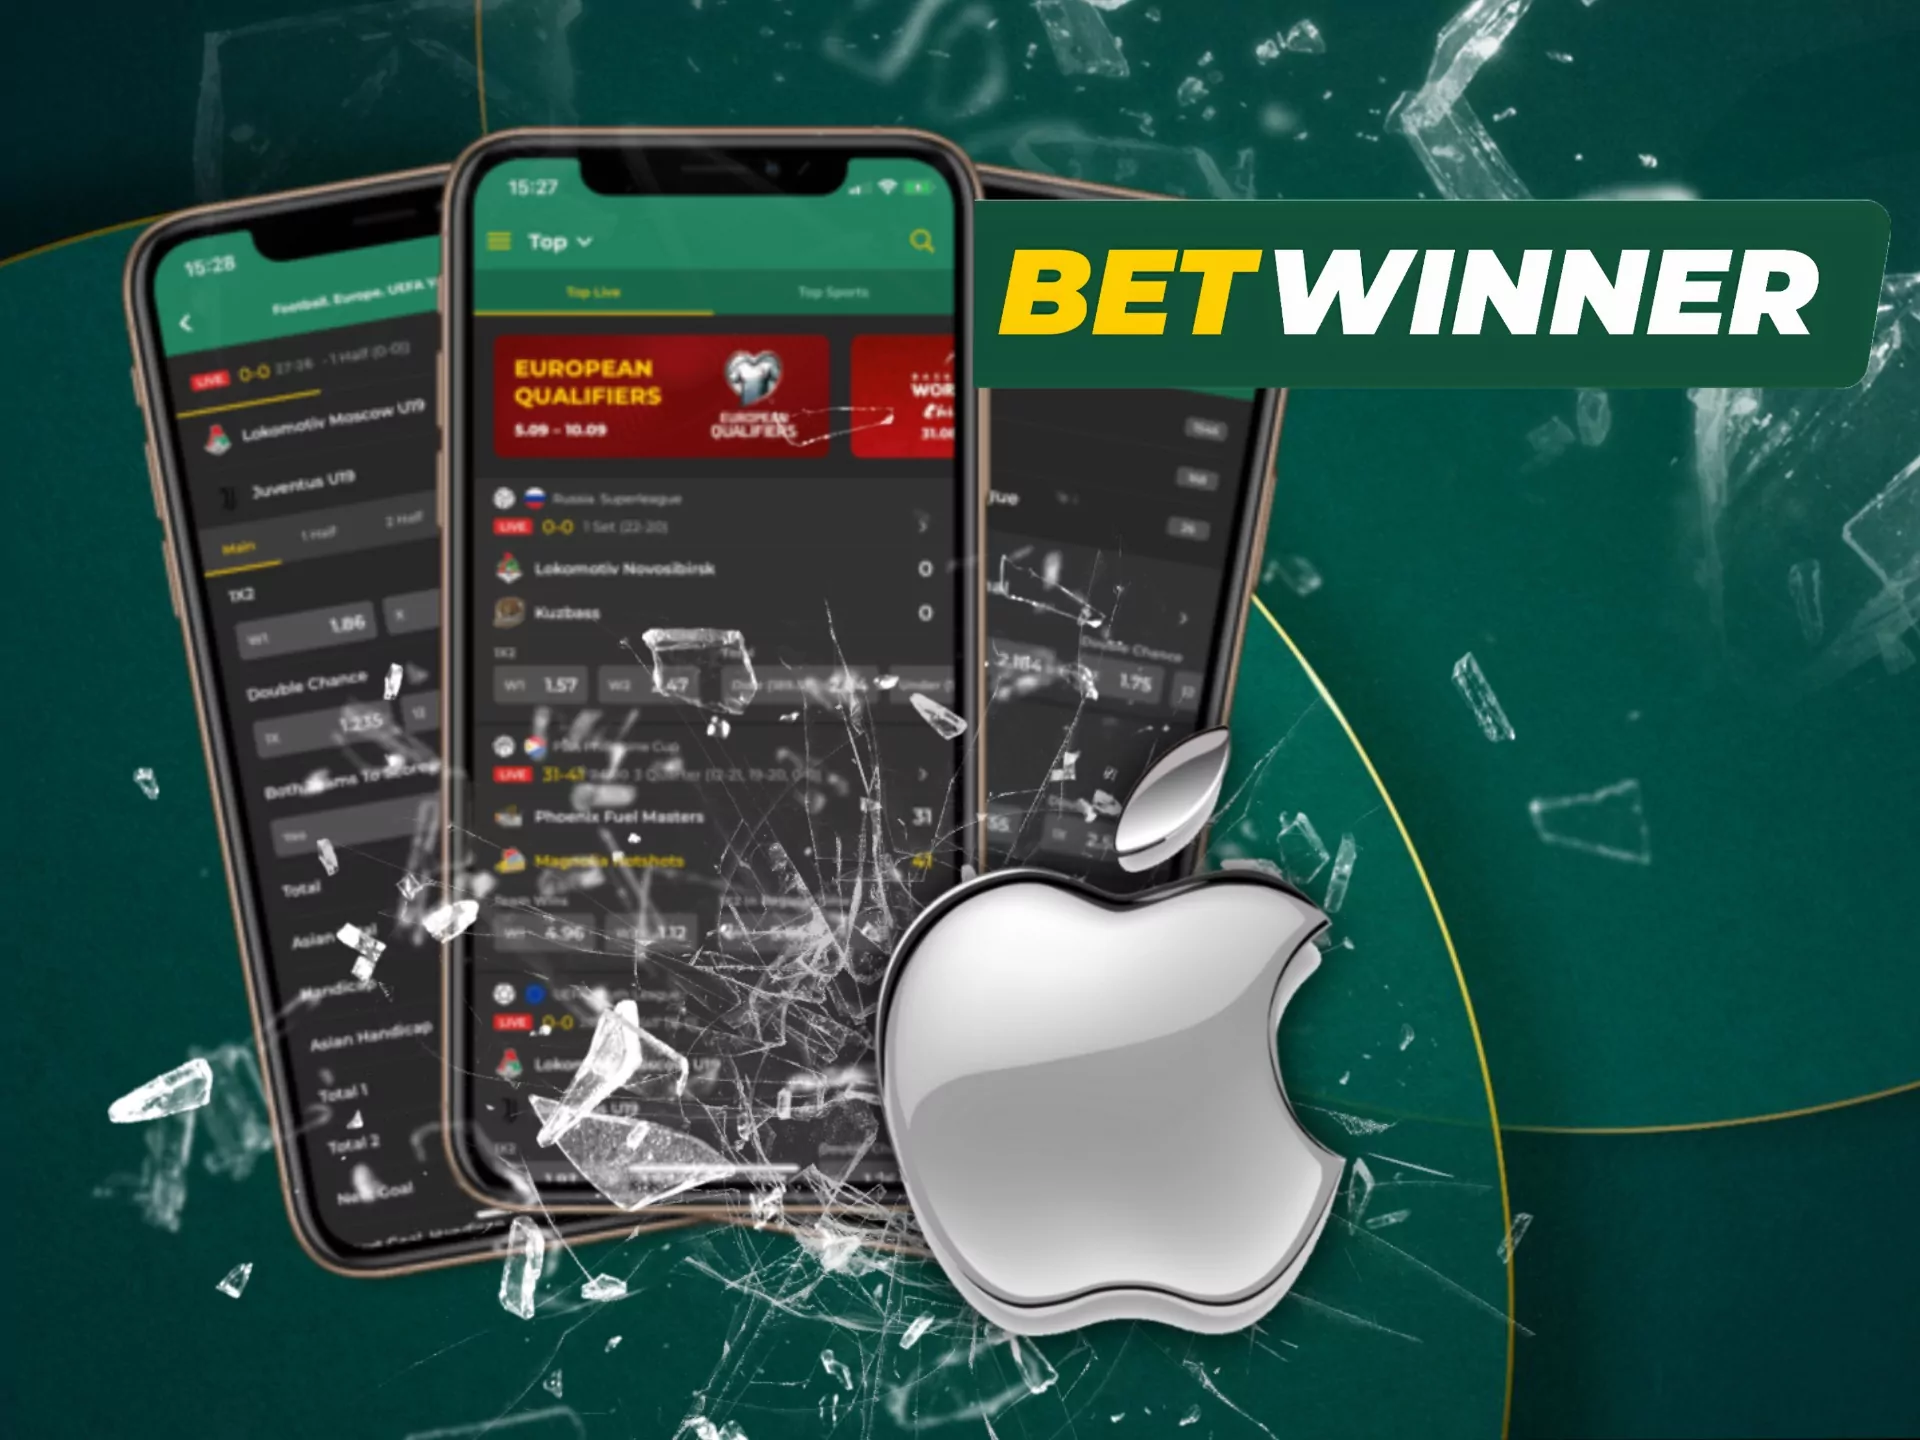 iPhone owners can use the Betwinner iOS app for betting online.